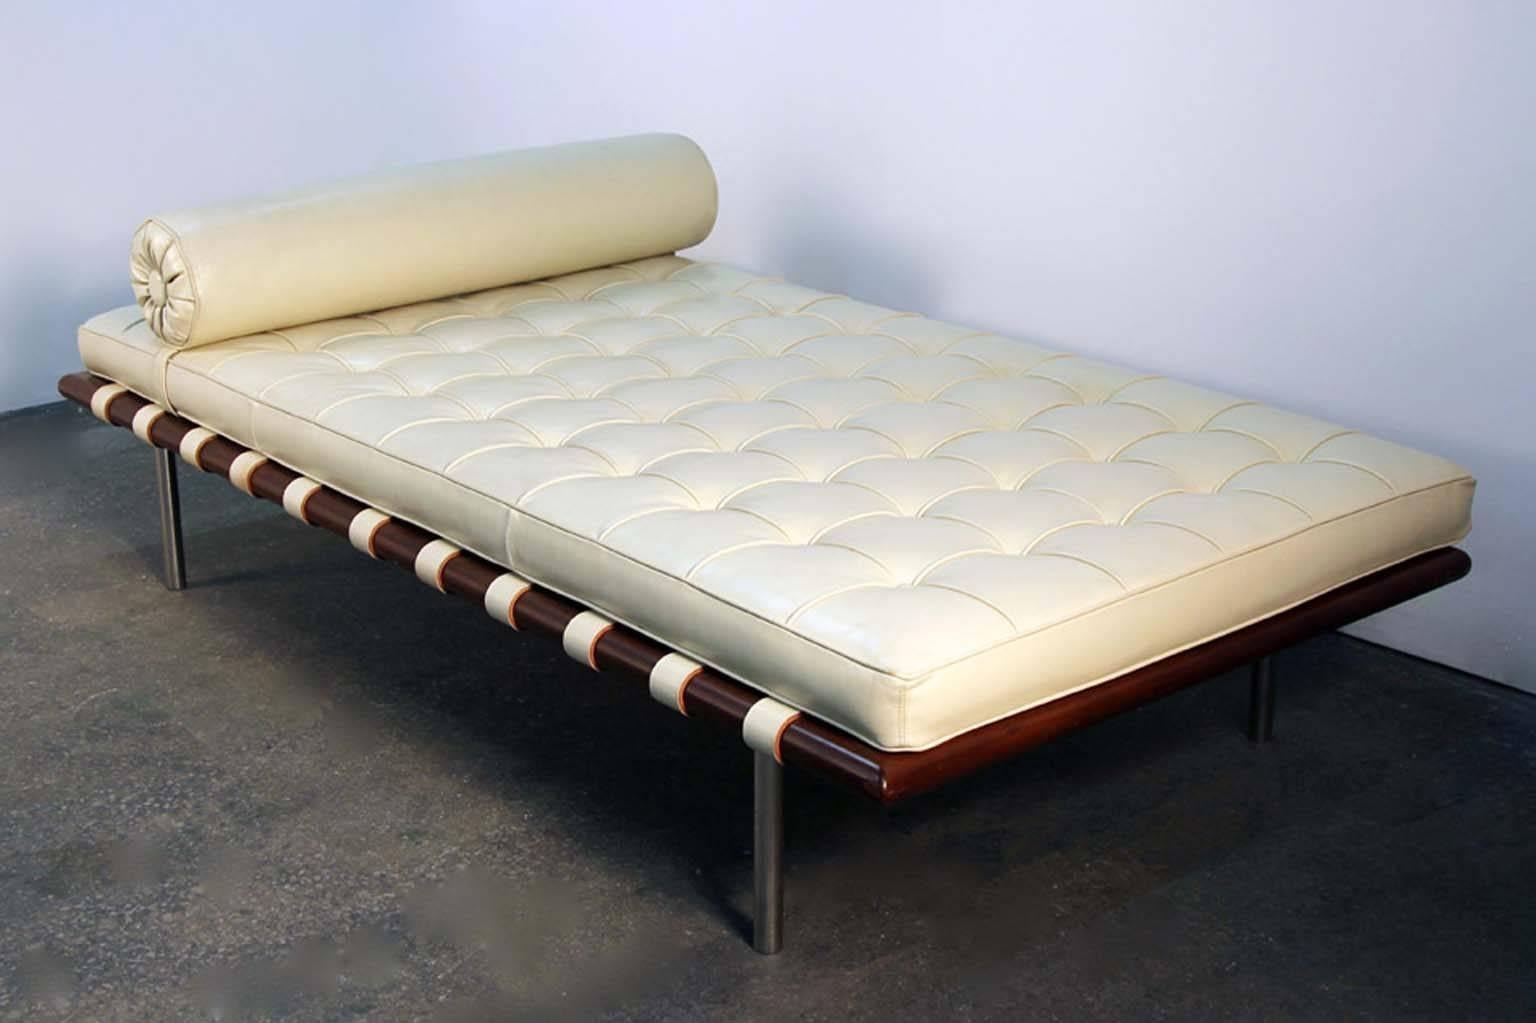 Incredible iconic Mies Van Der Rohe designed Barcelona daybed in white cream leather. With original bolster pillow. Newer version with Knoll signature upholstery on bottom and beautiful leather.